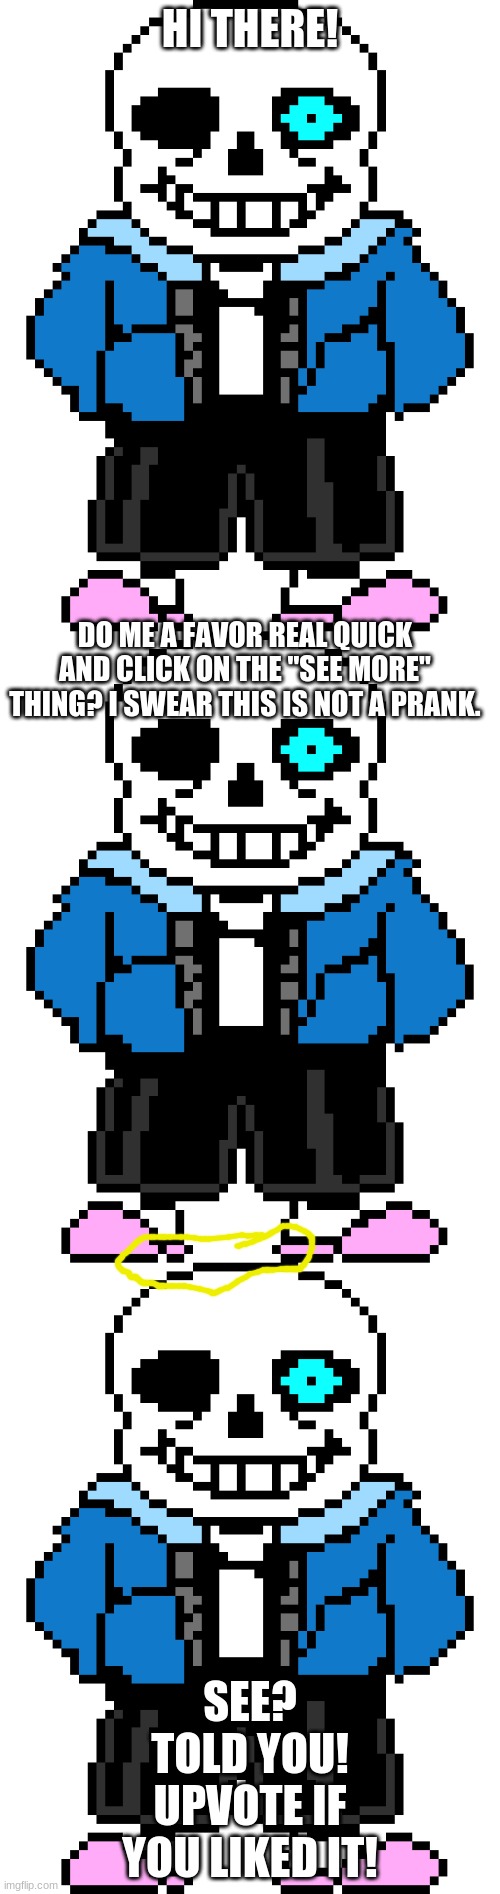 he tells the truth, this is not a prank! | HI THERE! DO ME A FAVOR REAL QUICK AND CLICK ON THE "SEE MORE" THING? I SWEAR THIS IS NOT A PRANK. SEE? TOLD YOU! UPVOTE IF YOU LIKED IT! | image tagged in bad time sans | made w/ Imgflip meme maker